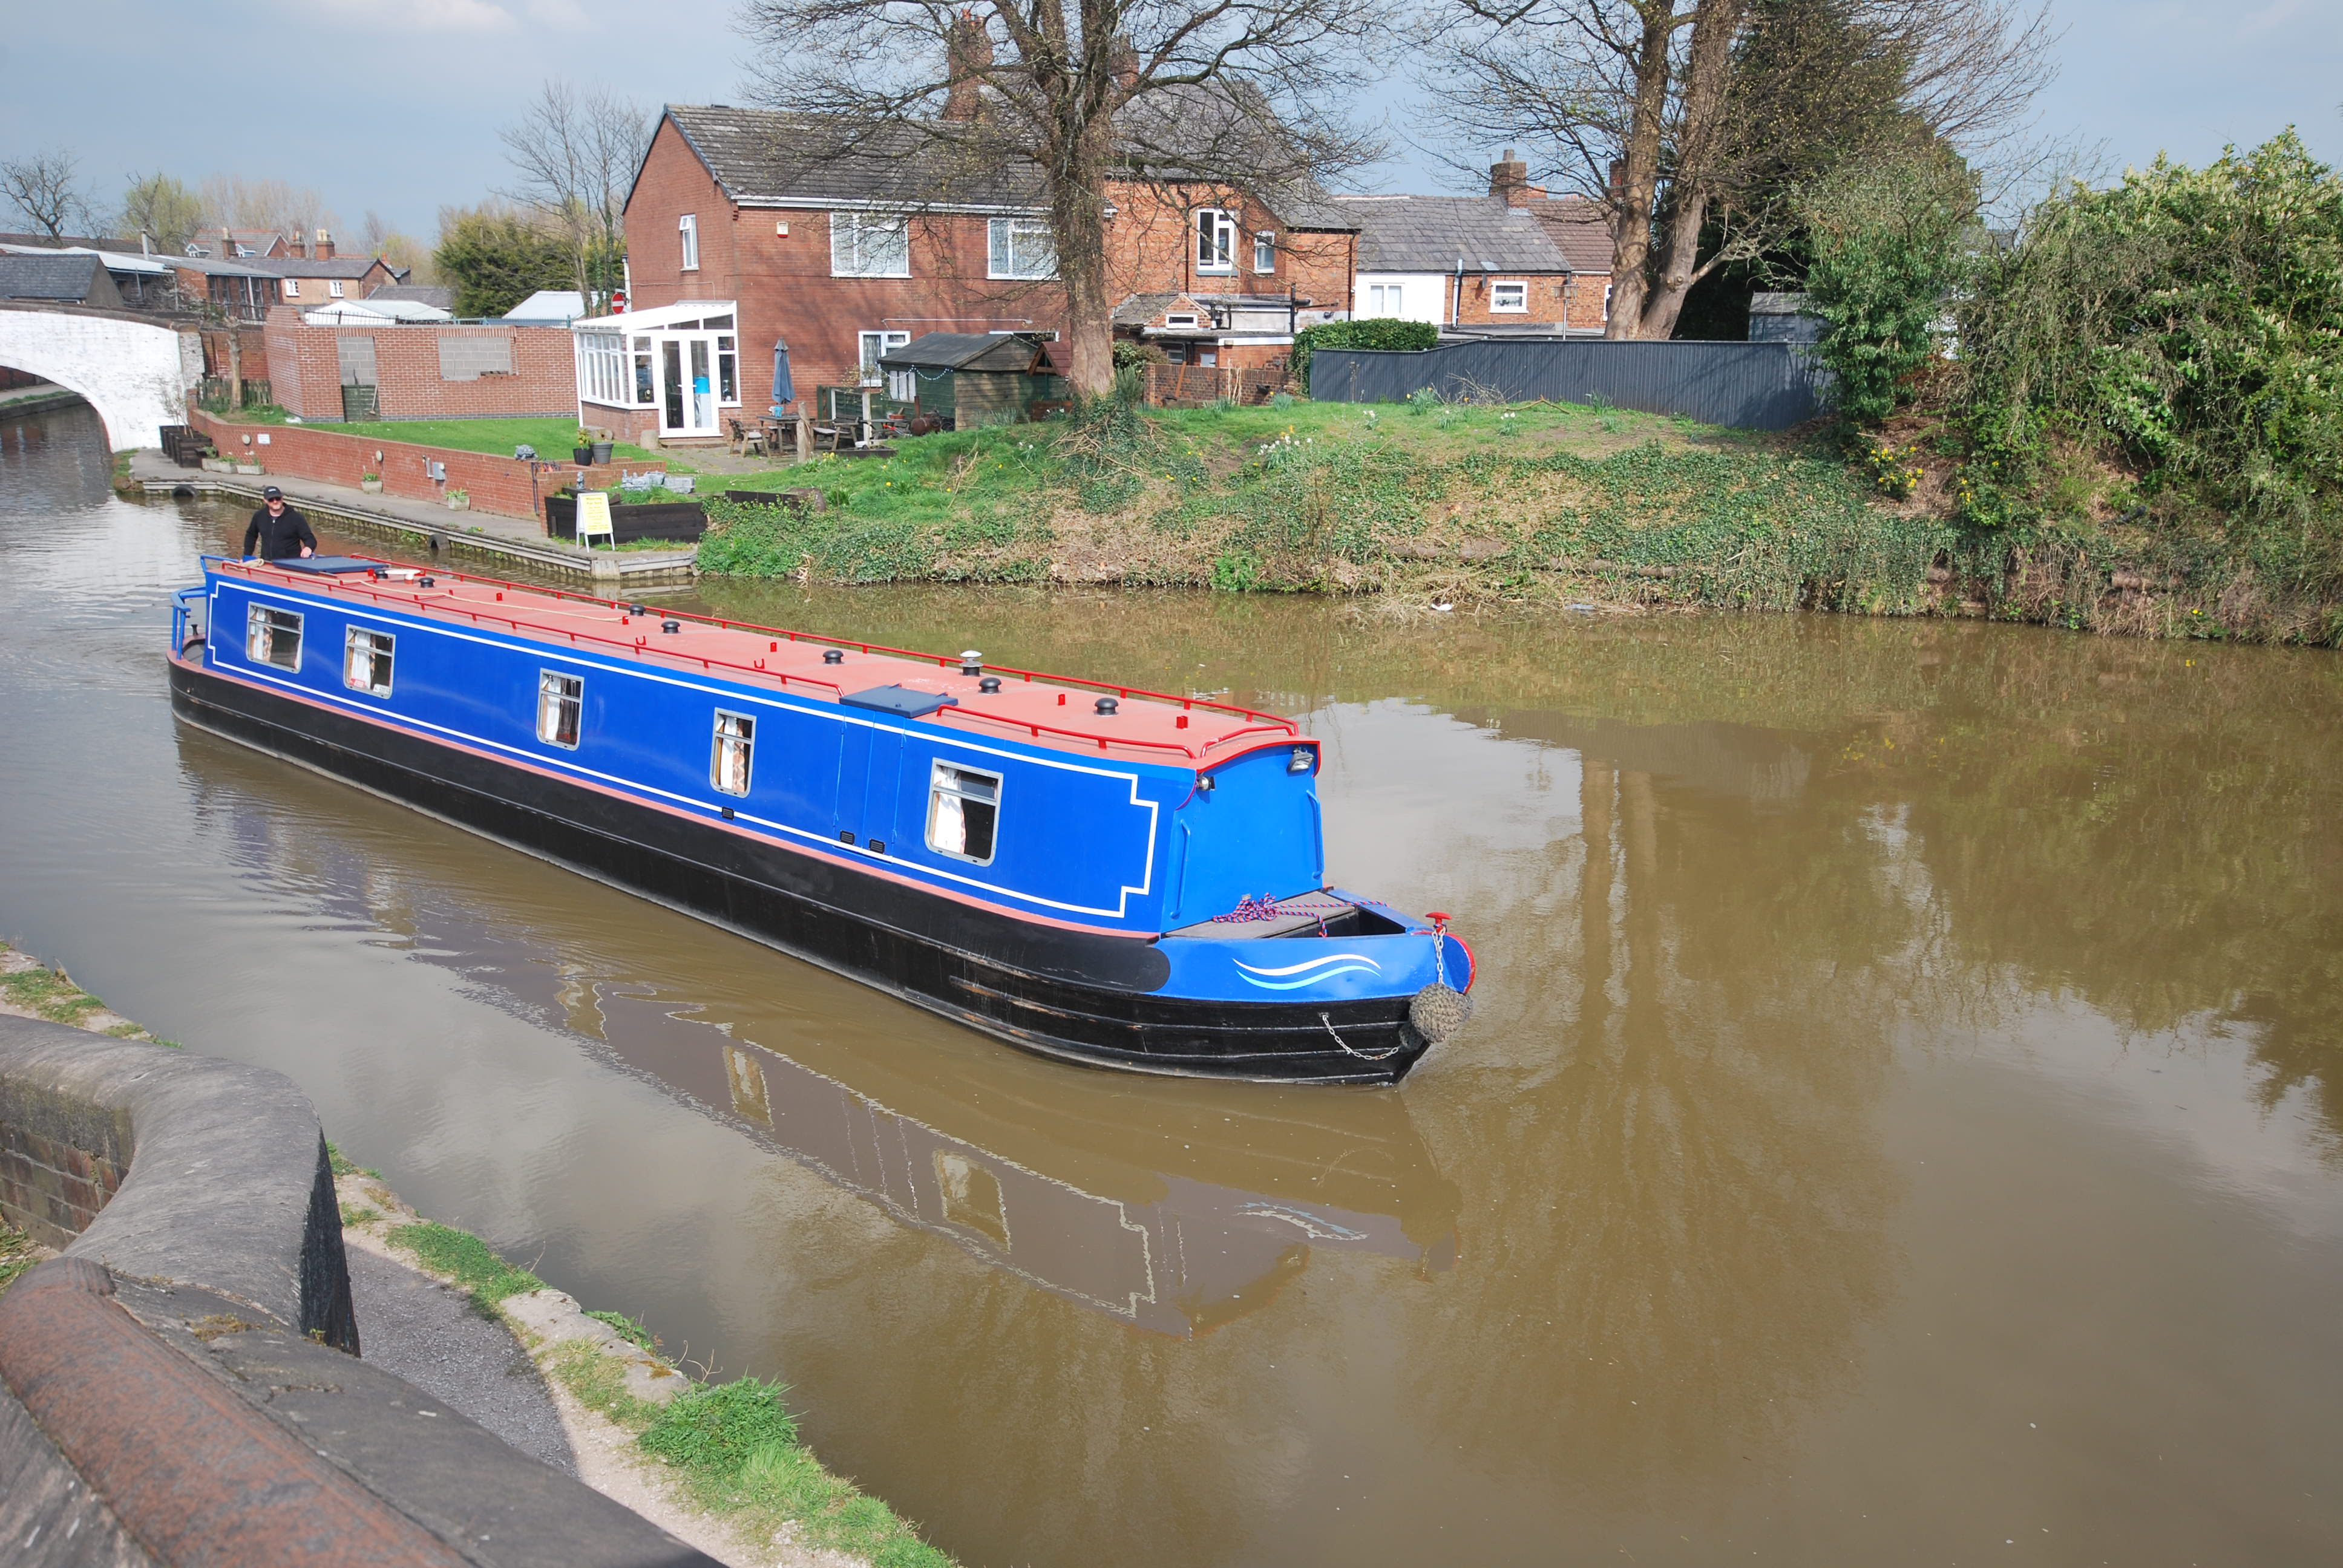 The Courageous class canal boat